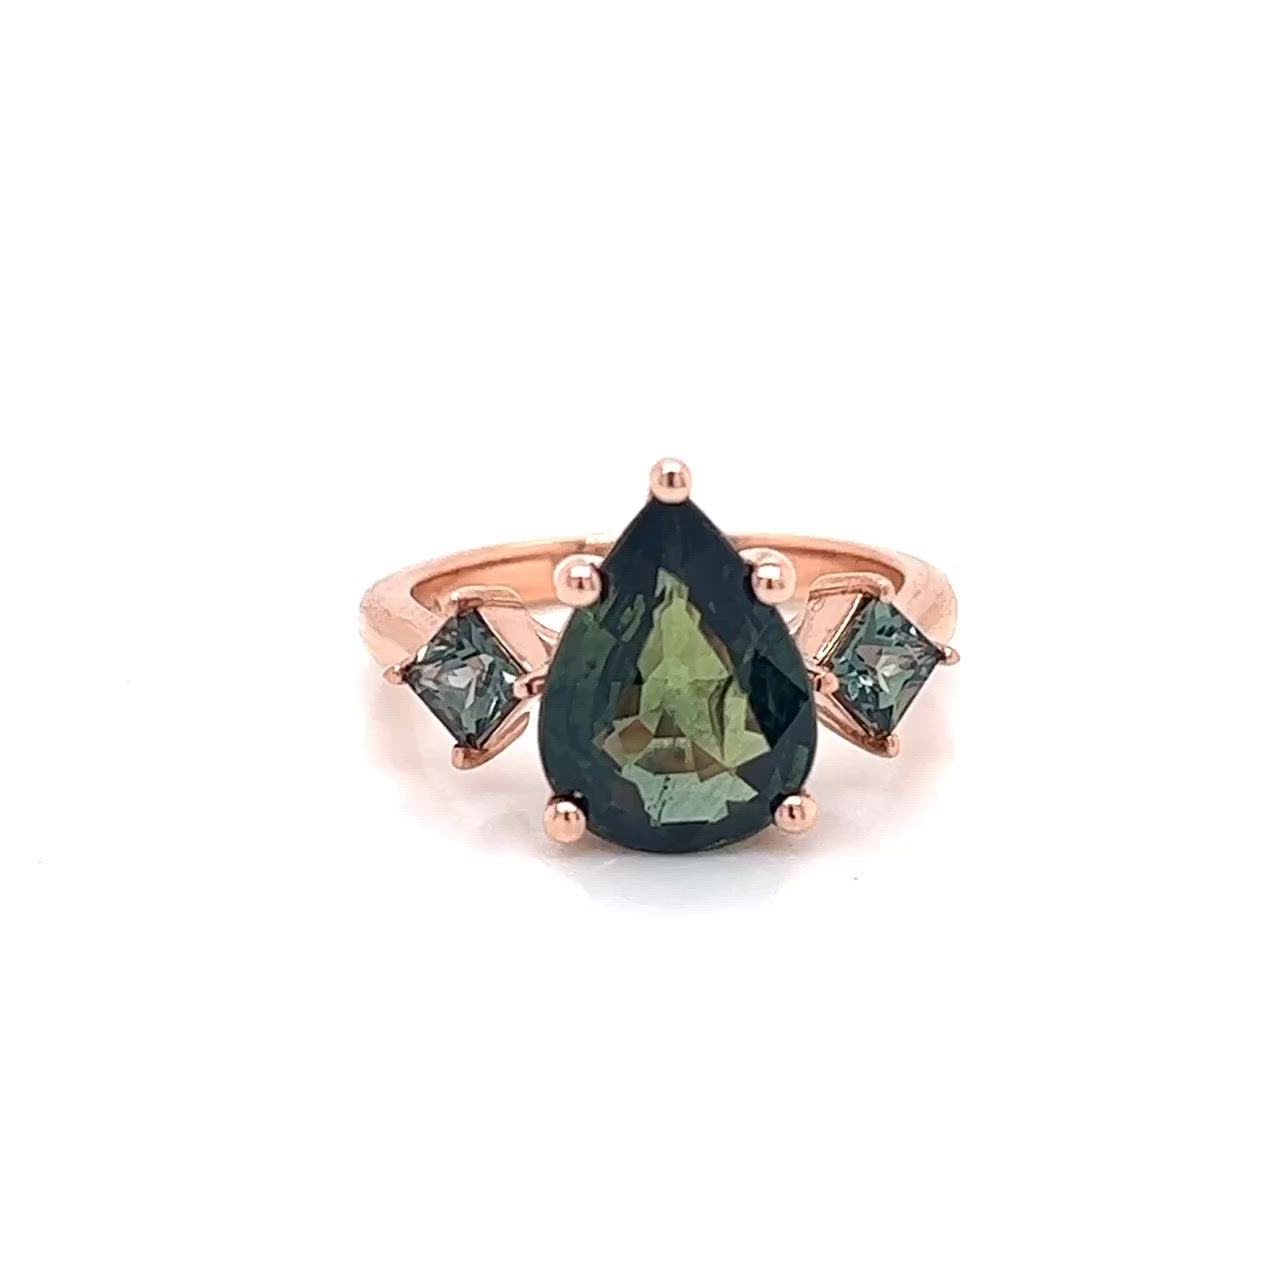 Angelique Ring with a 3.00 Carat Green Pear Sapphire and Blue Accent Sapphires in 14k Rose Gold - Ready to Size and Ship